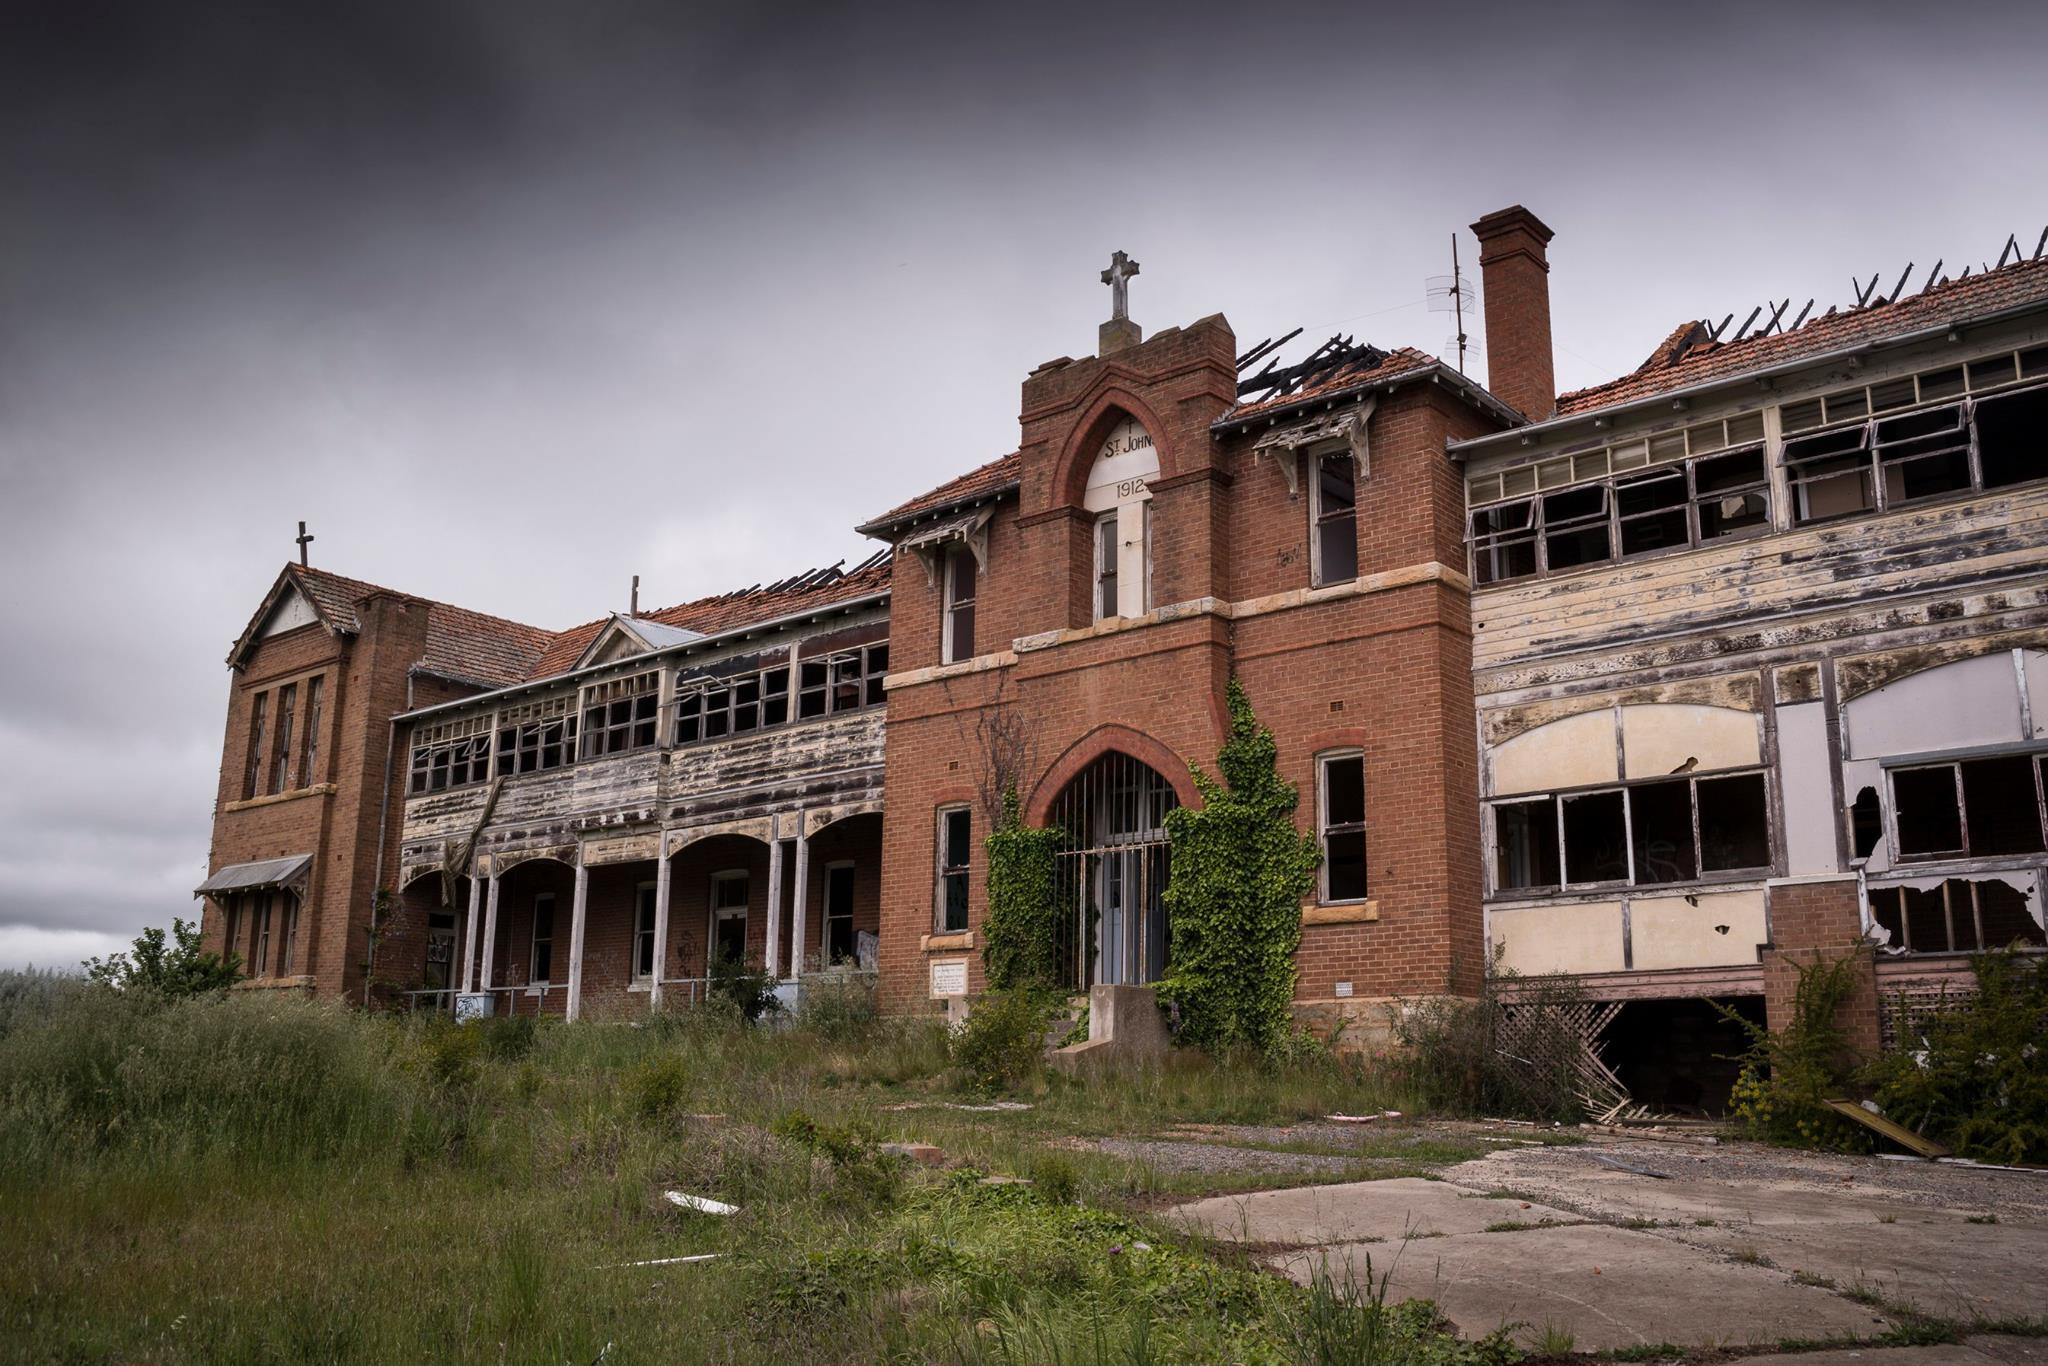 St John's Orphanage in Goulburn to be demolished